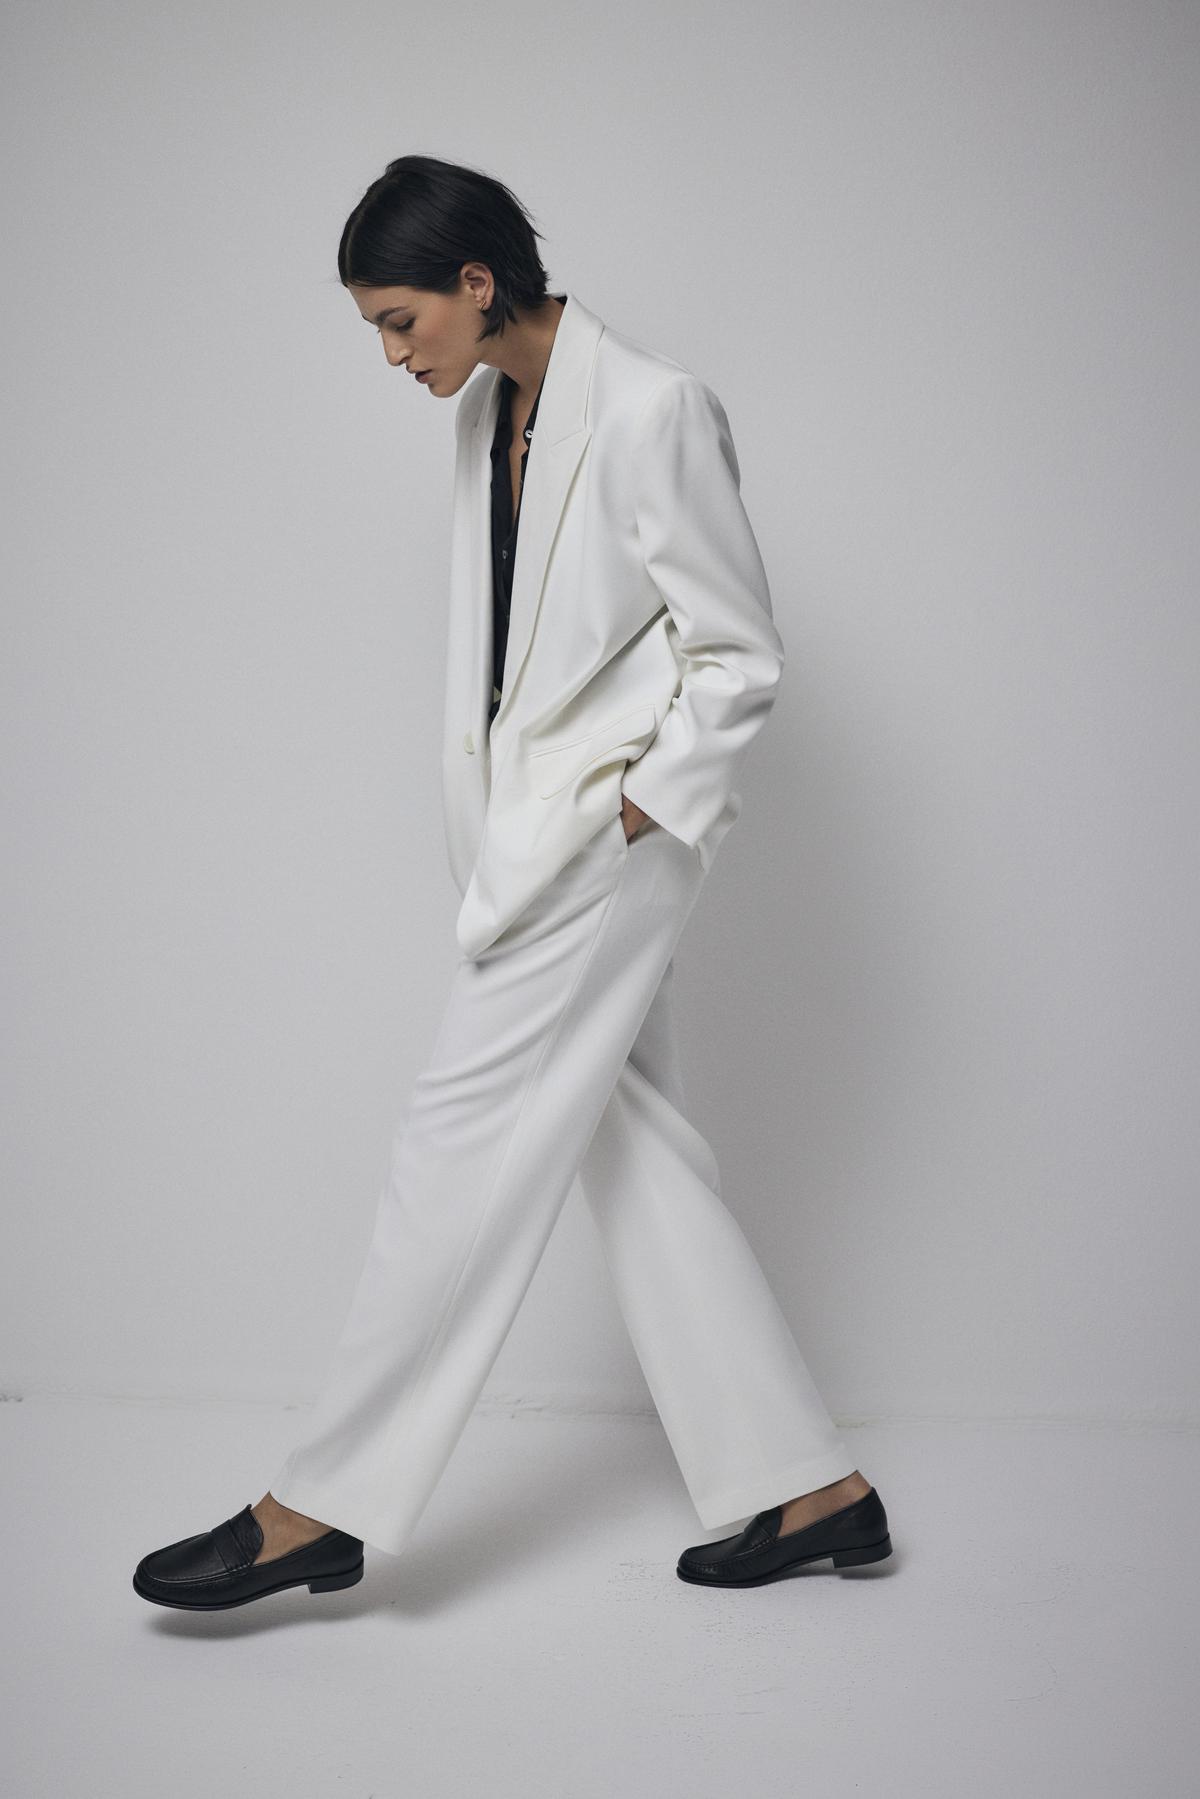 A woman wearing a white structured Fairfax blazer by Velvet by Jenny Graham with black shoes.-36168664285377